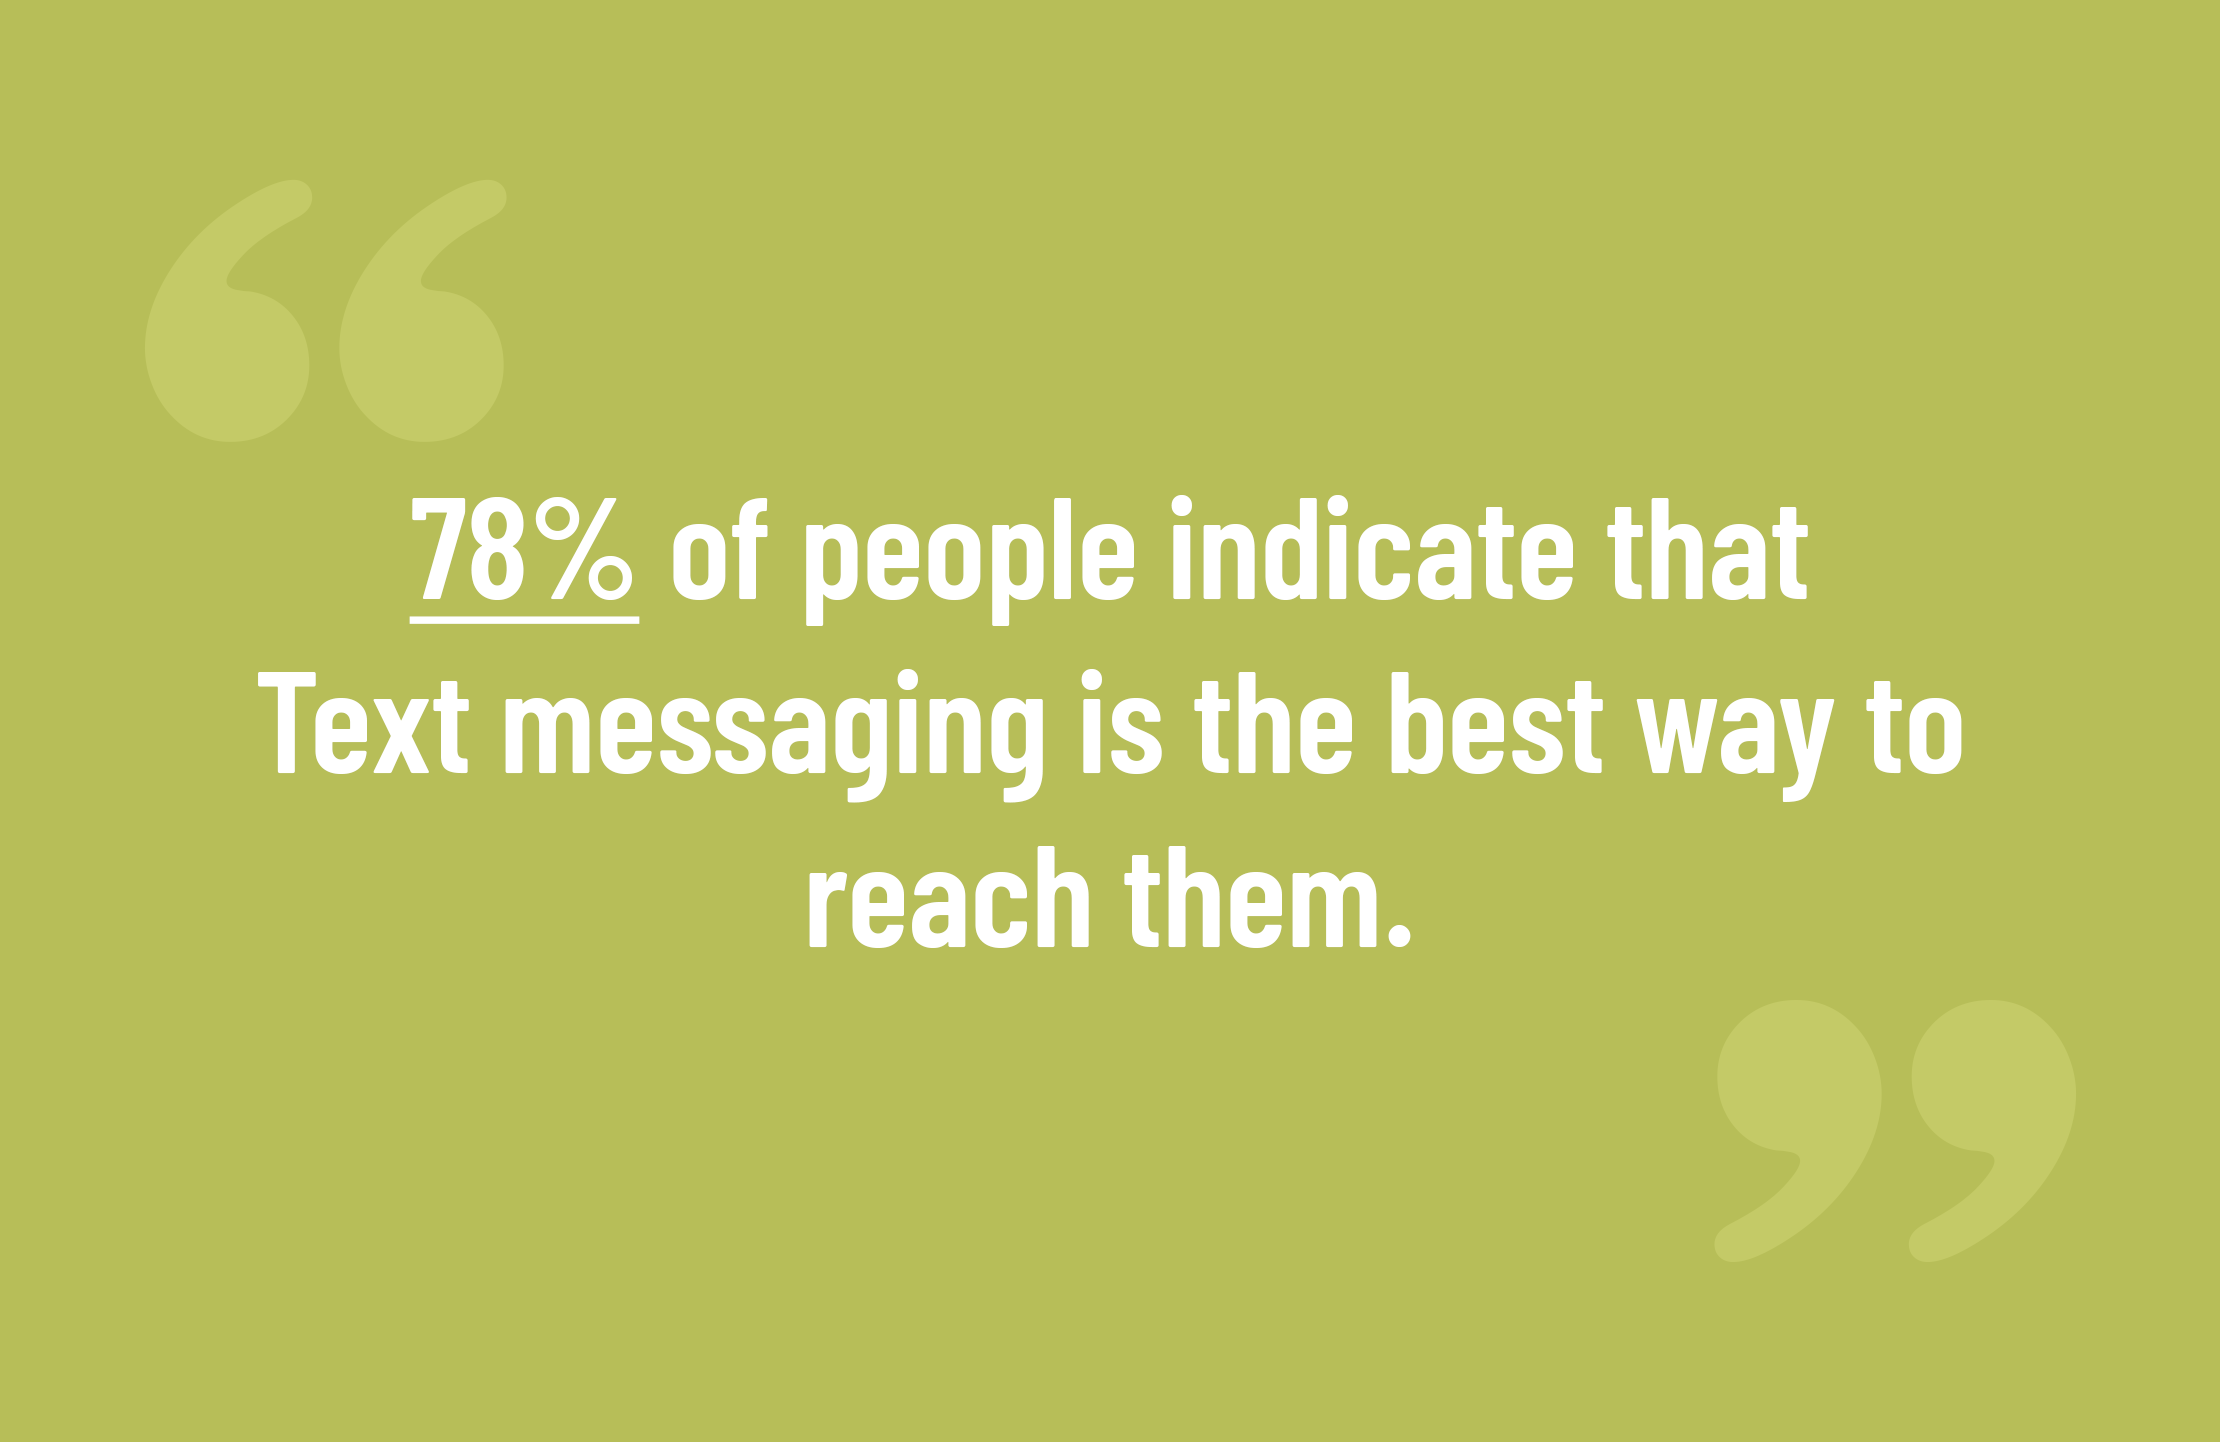 Top Ways to Succeed in Nonprofit SMS Marketing